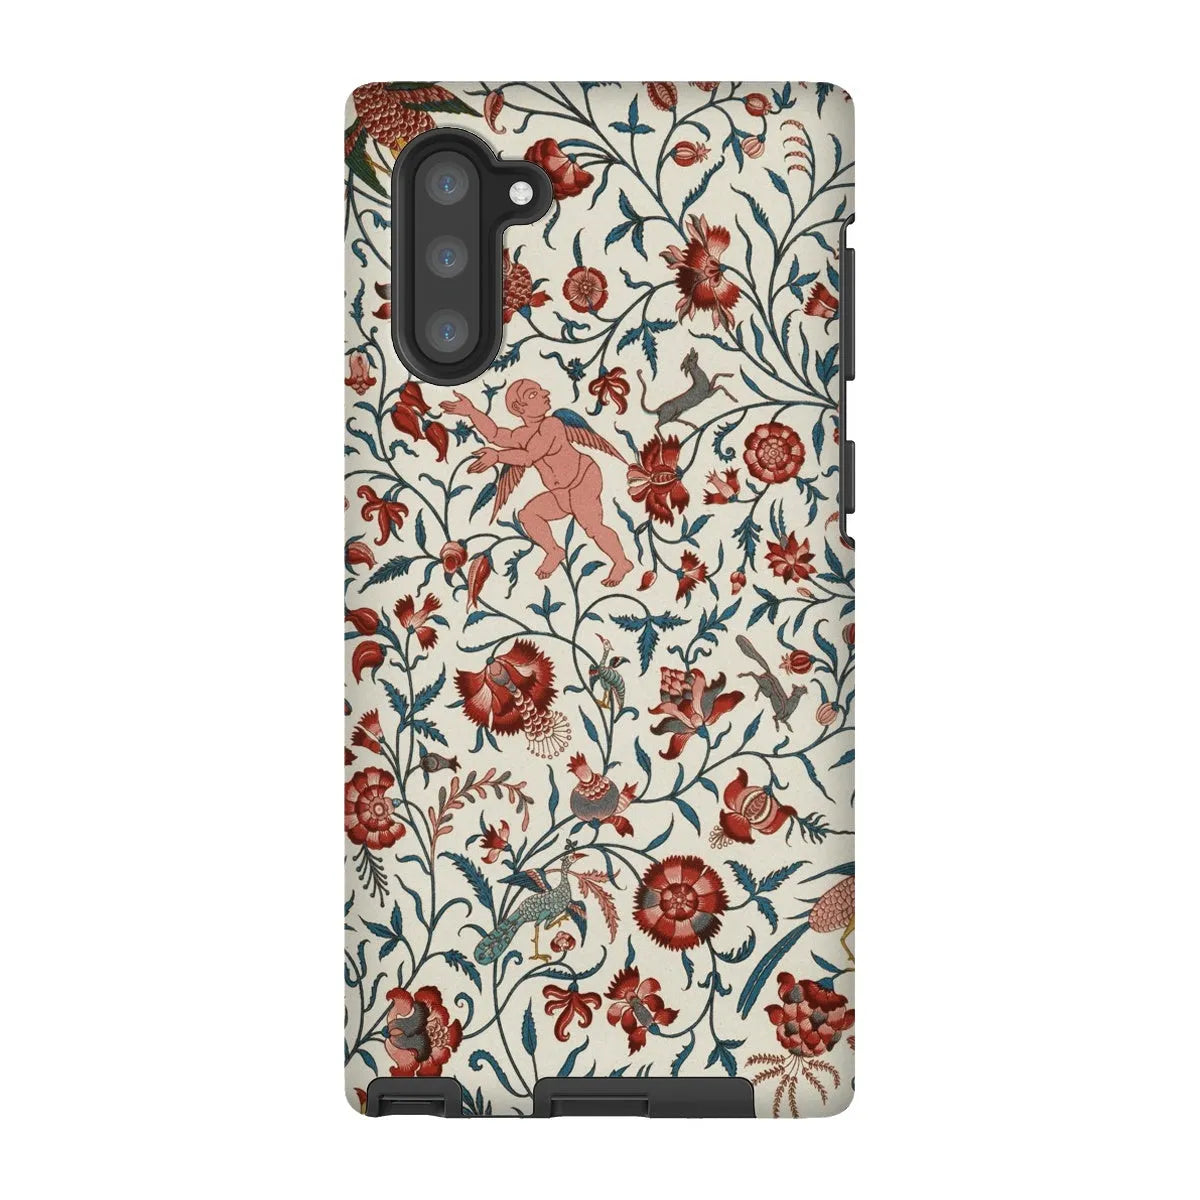 Persian Pattern From L’ornement Polychrome By Auguste Racinet Tough Phone Case - Samsung Galaxy Note 10 / Matte